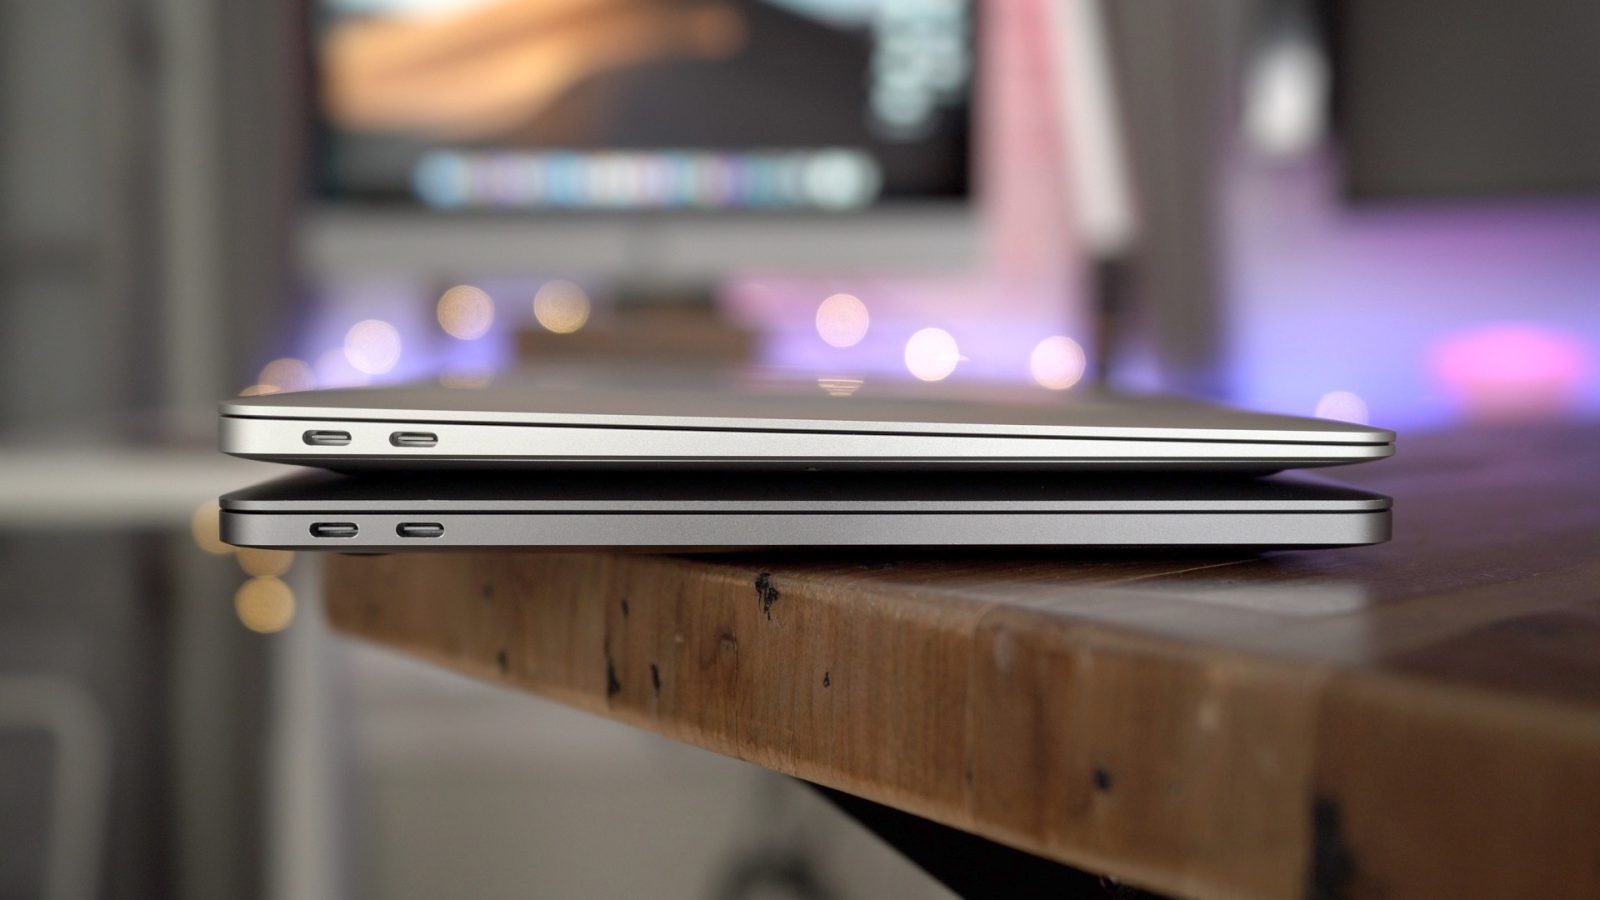 Here S How The 19 Macbook Air And Macbook Pro Compare 9to5mac